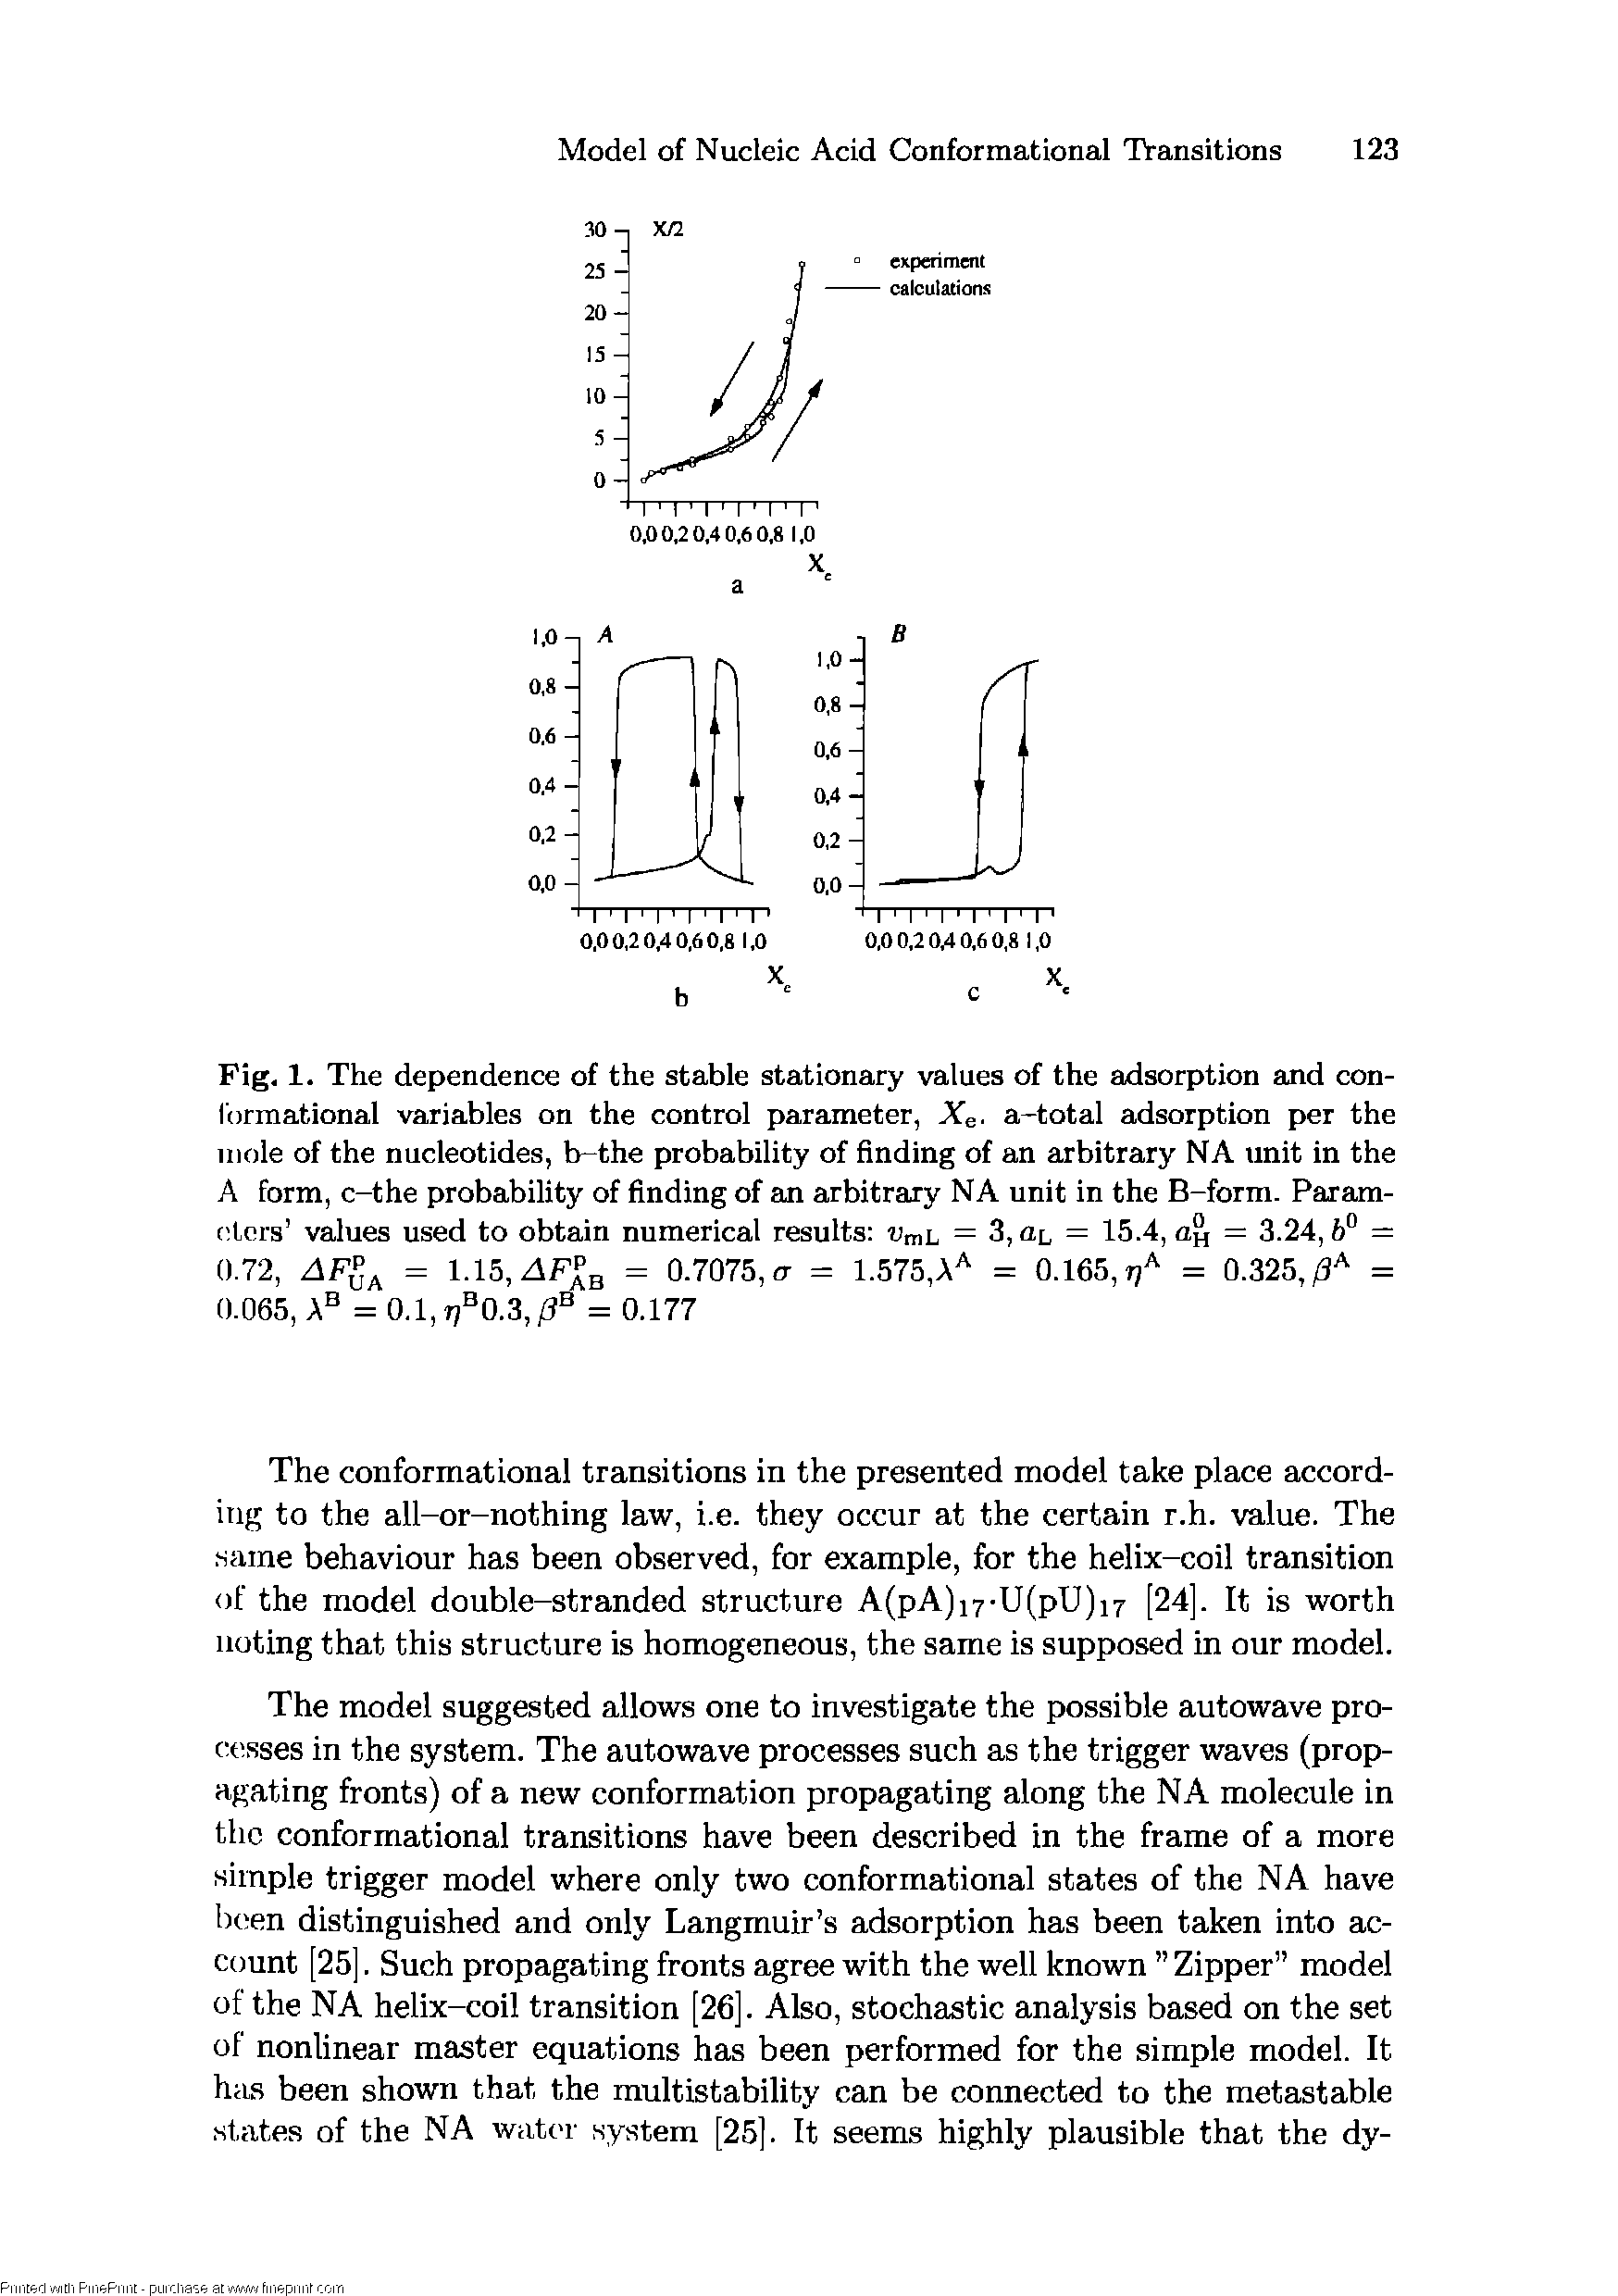 Fig. 1. The dependence of the stable stationary values of the adsorption and conformational variables on the control parameter, Xe. a-total adsorption per the mole of the nucleotides, b-the probability of finding of an arbitrary NA unit in the A form, c-the probability of finding of an arbitrary NA unit in the B-form. Param-(ders values used to obtain numerical results Vmi = 3,nL = 15.4, = 3.24,6° =...